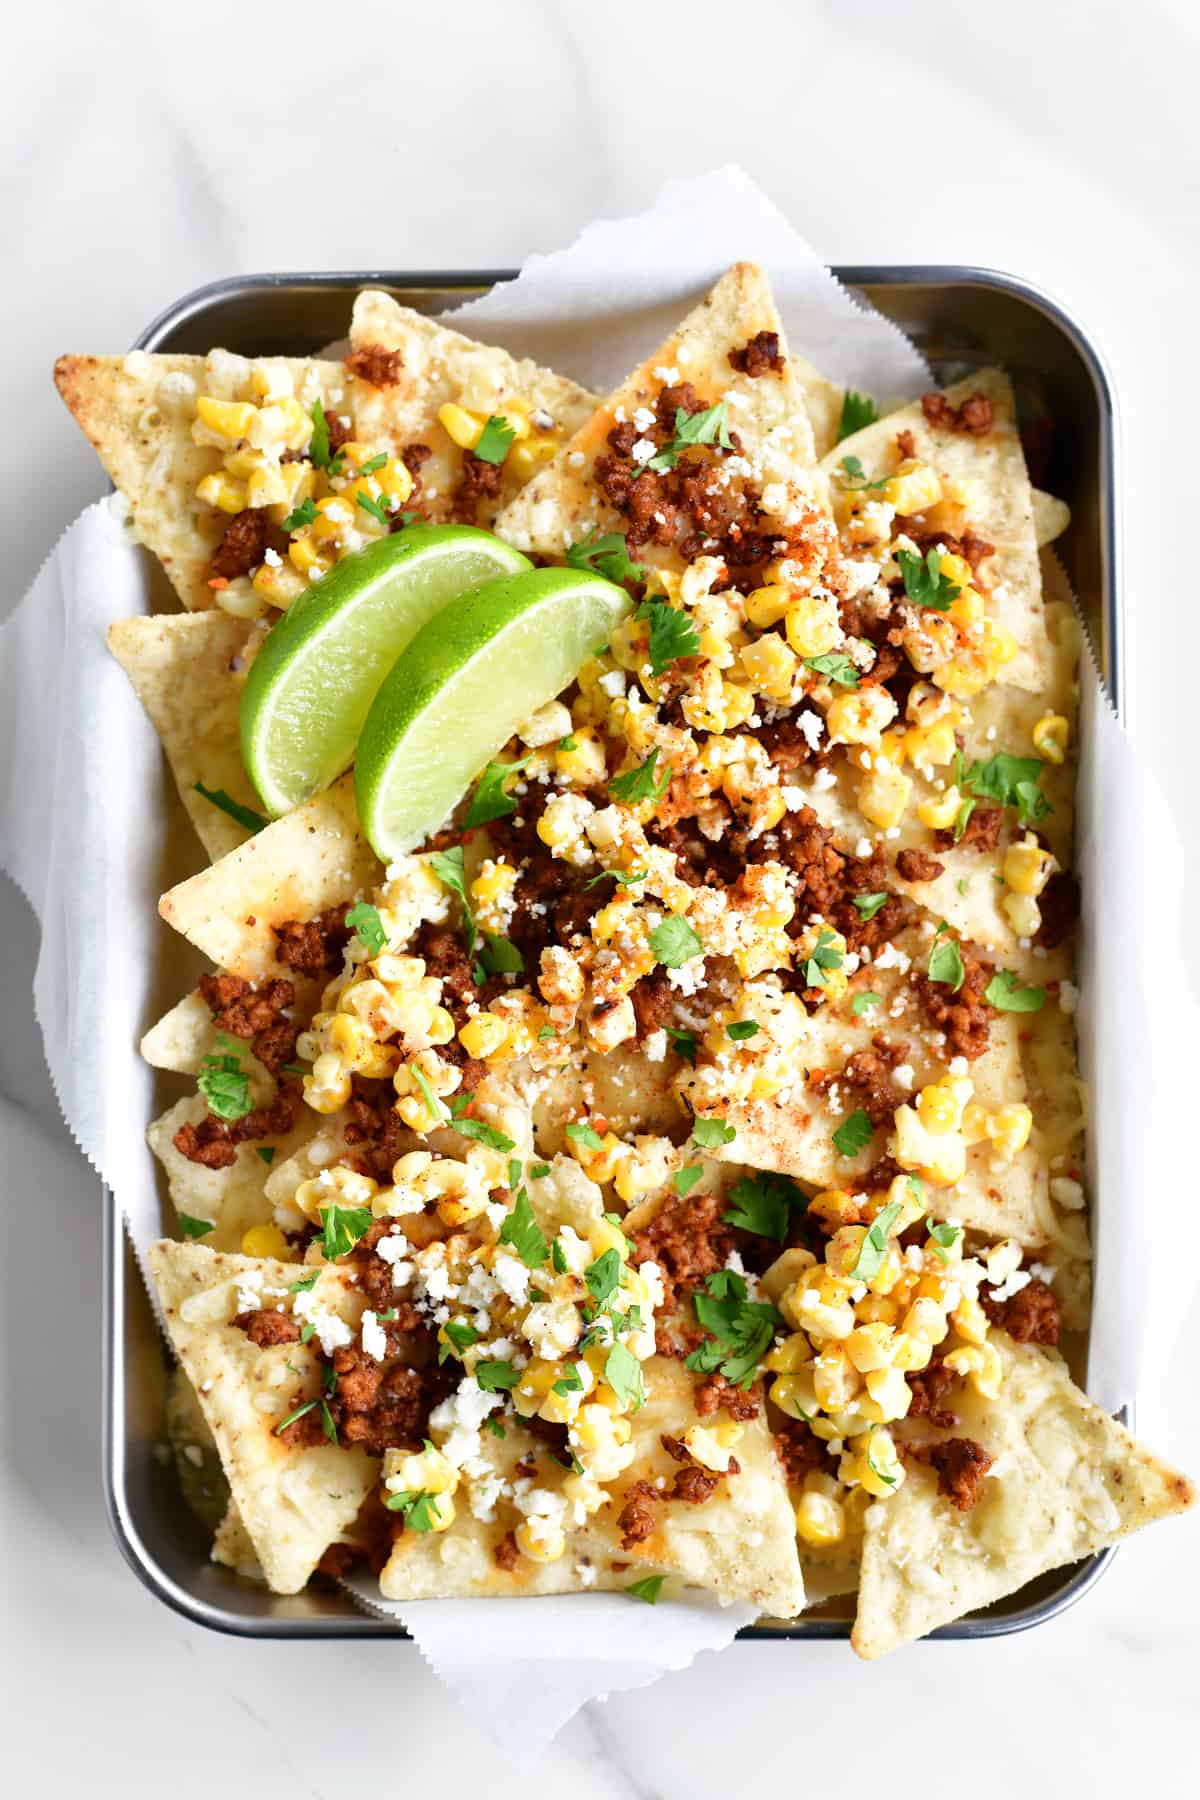 Mexican Street Corn nachos in a tray with lime garnish